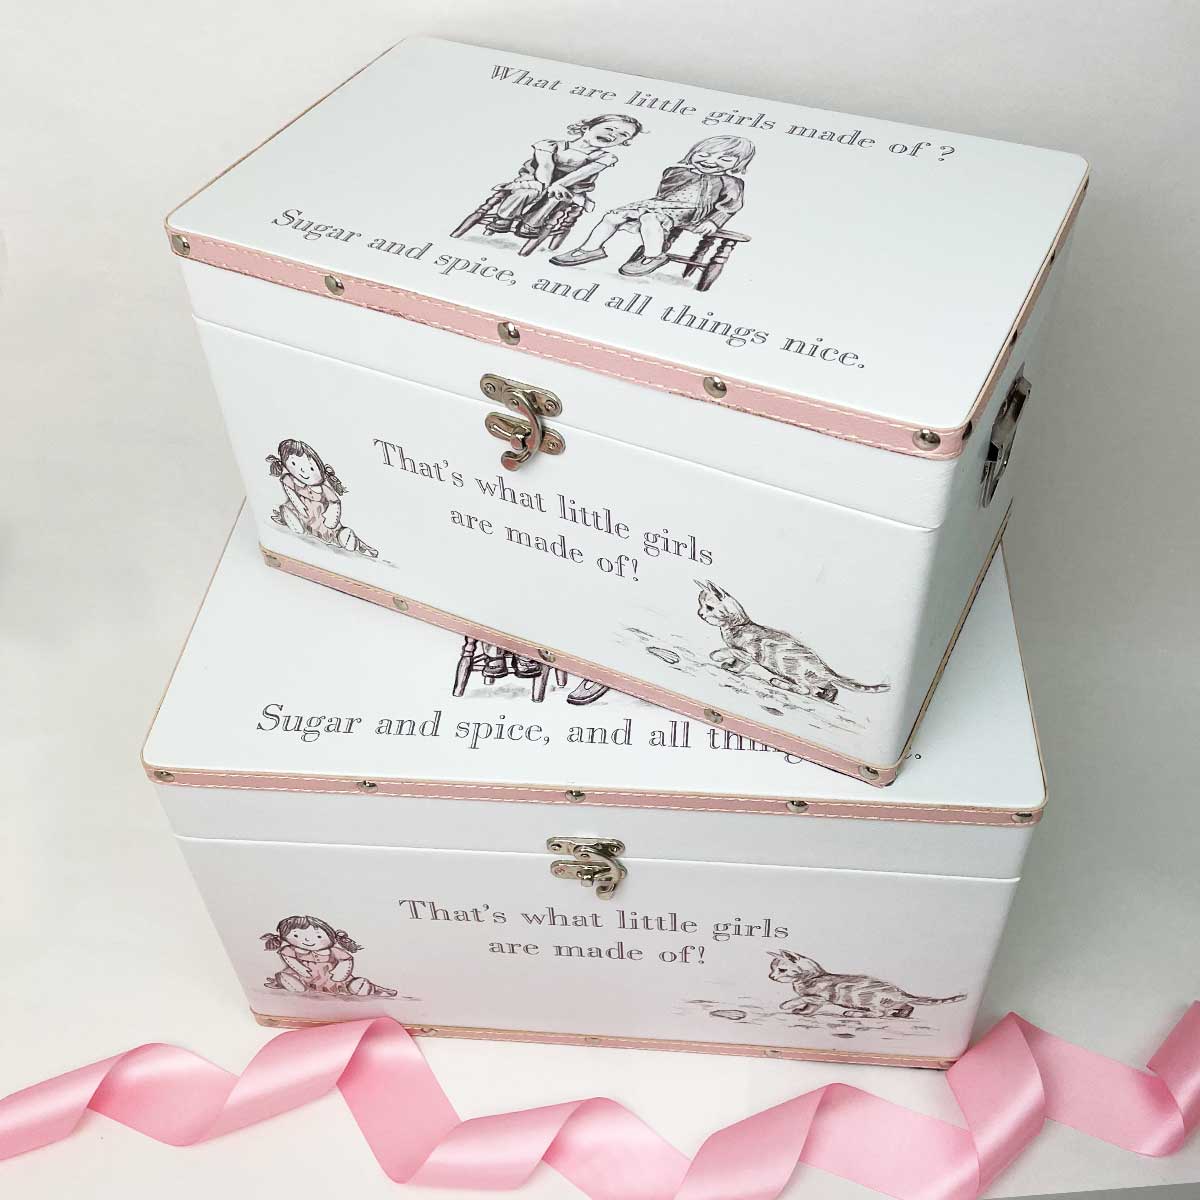 2 Large Keepsake Boxes, 'What are little girls made of?'